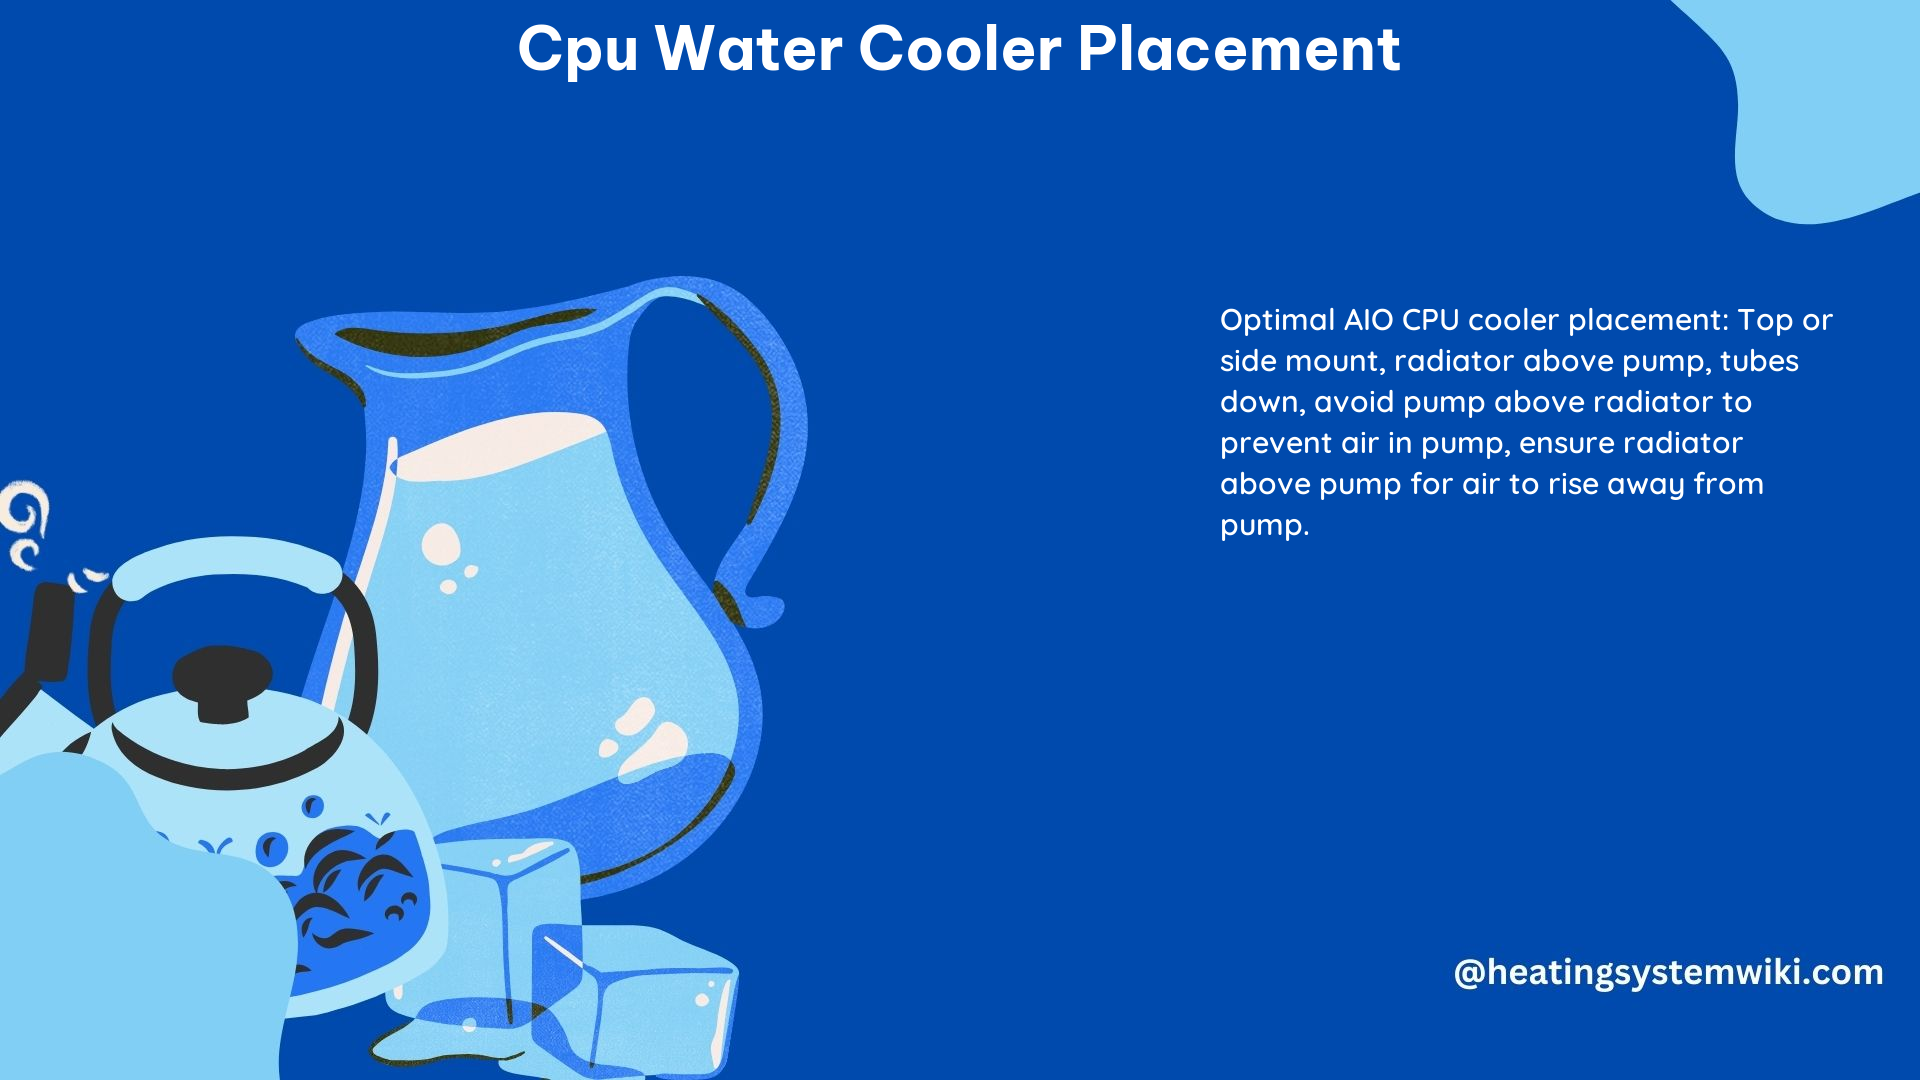 CPU Water Cooler Placement